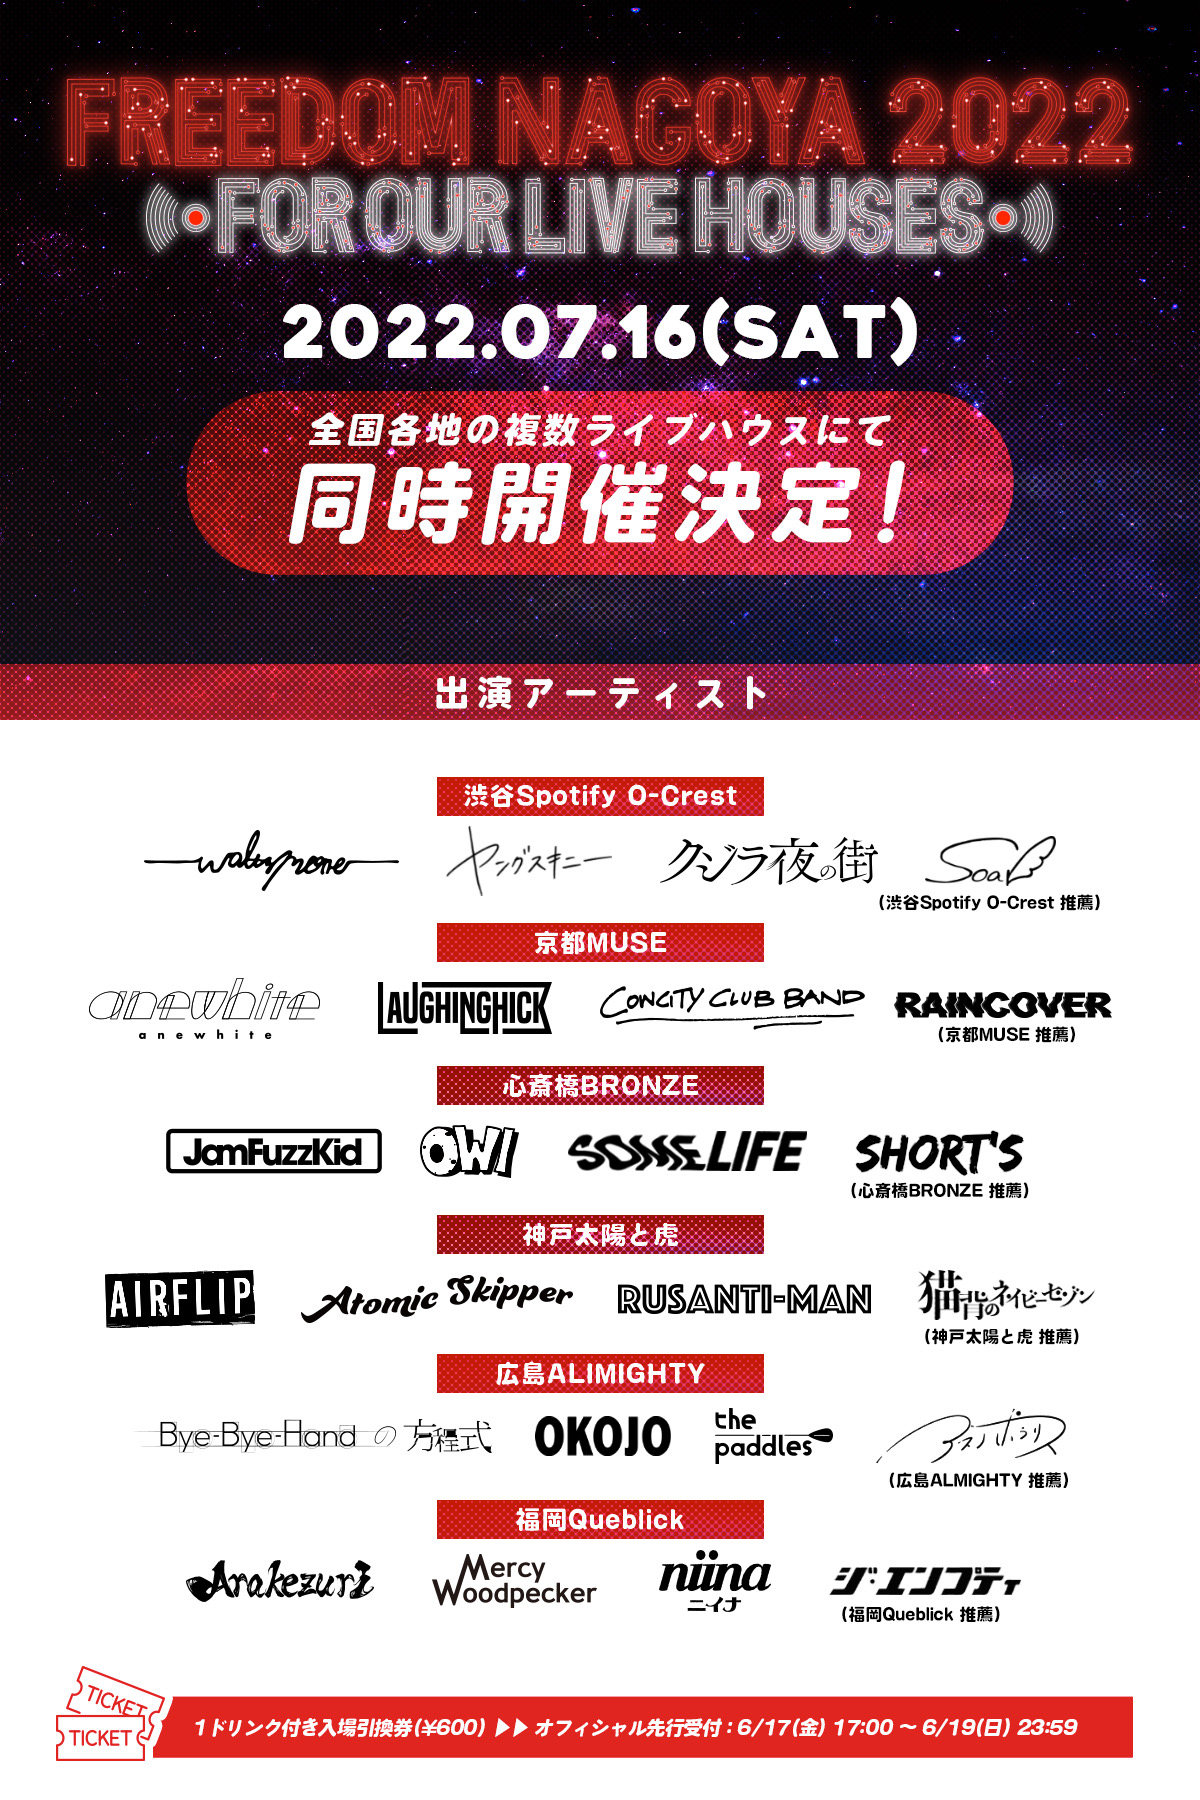 FREEDOM NAGOYA 2022 -FOR OUR LIVE HOUSES- 出演アーティスト発